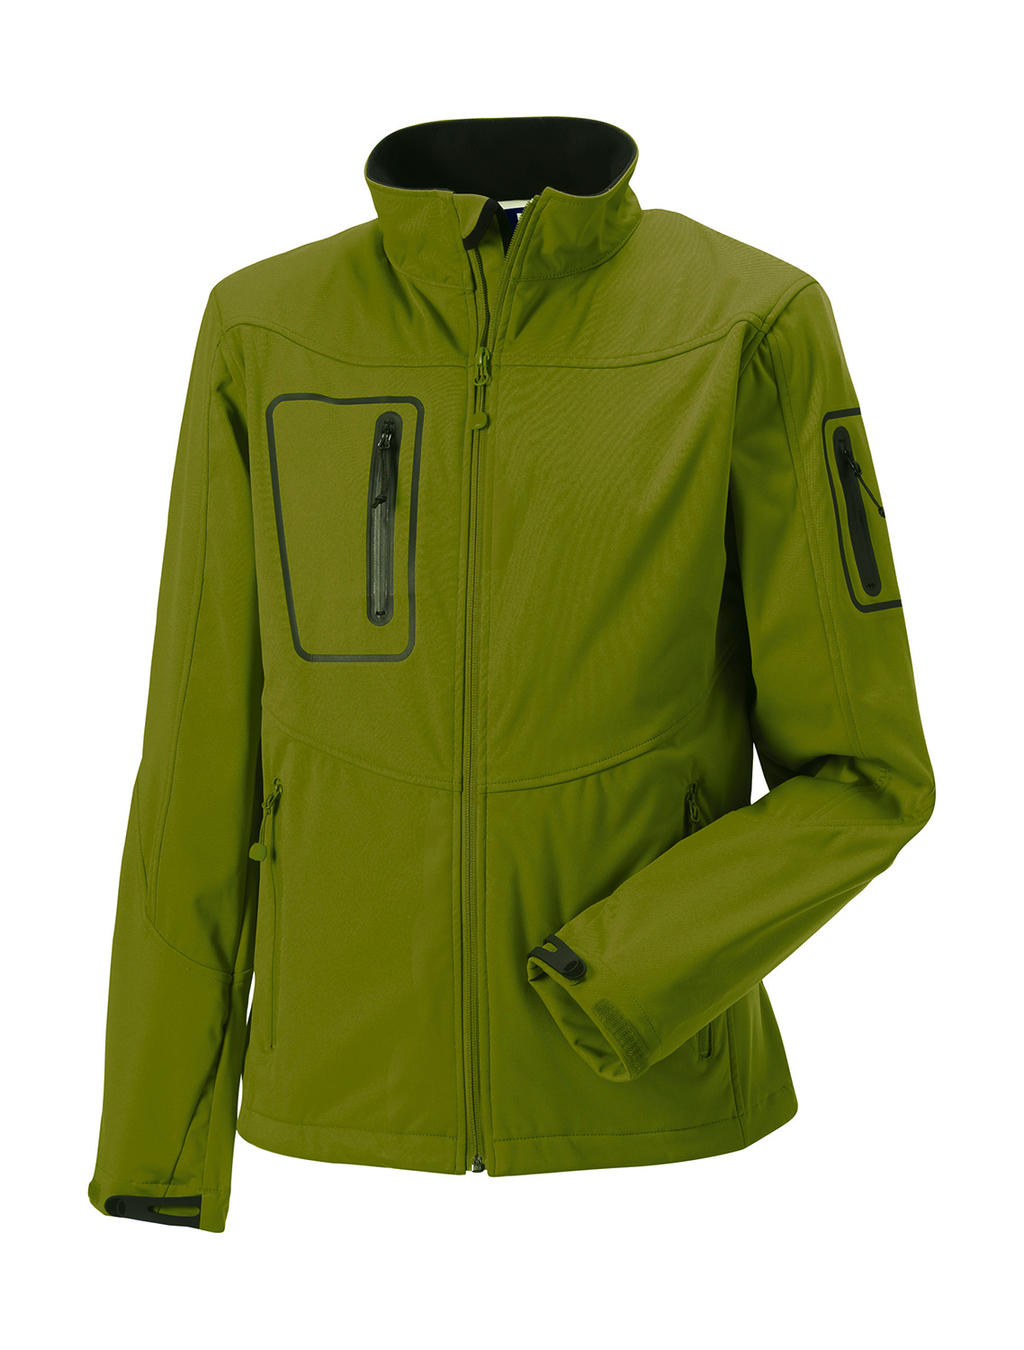  Mens Sportshell 5000 Jacket in Farbe Cactus